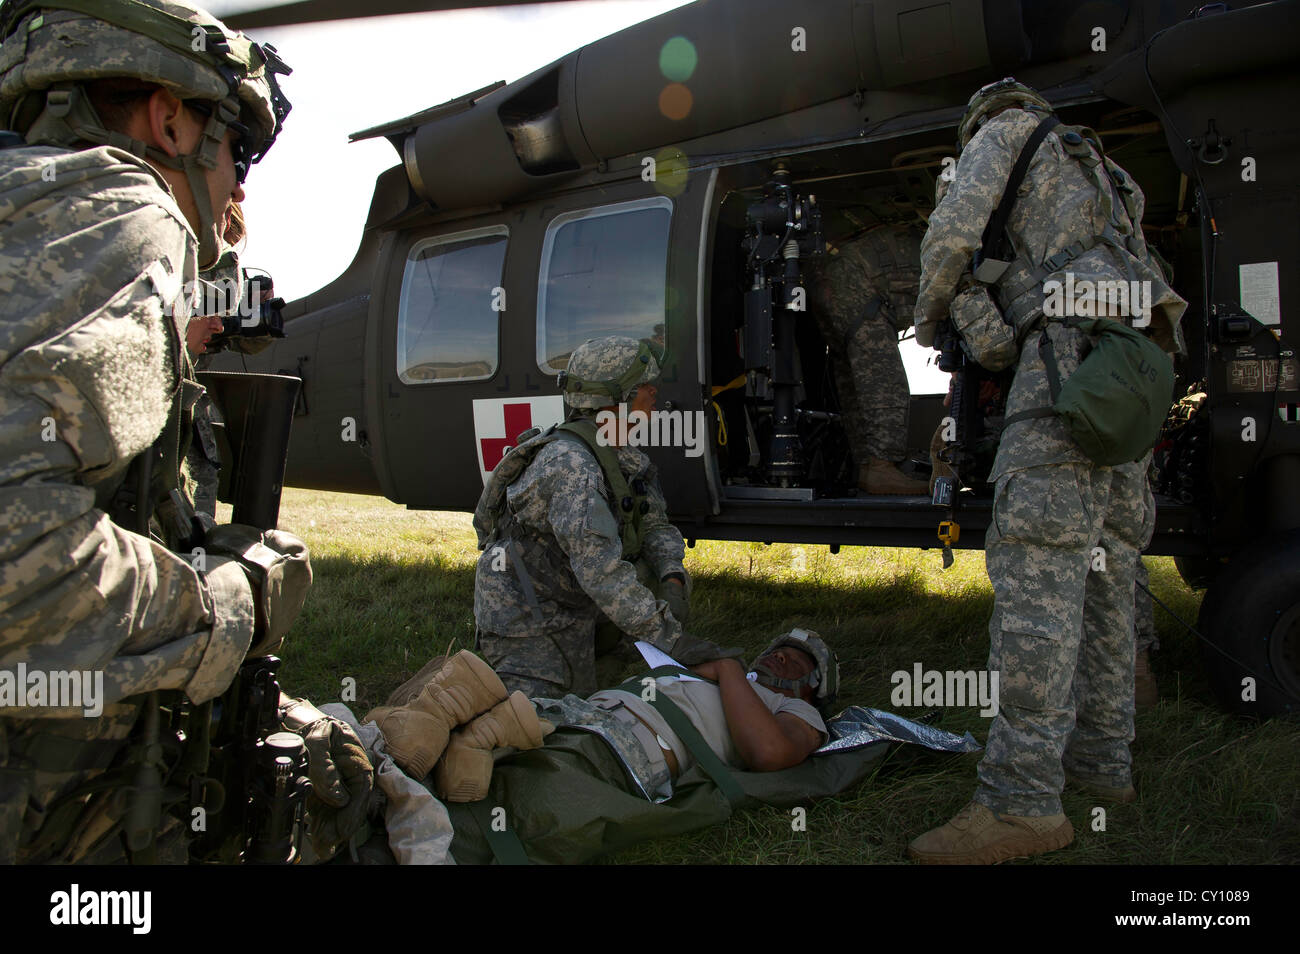 U.S. Army Soldiers prepare to load a simulated patient onto a UH-60M Black Hawk helicopter during a field exercise at the Joint Readiness Training Center (JRTC), Fort Polk, La., Oct. 15, 2012. JRTC 13-01 is designed to prepare and educate U.S. military Service members for deployments to the Middle East. Stock Photo